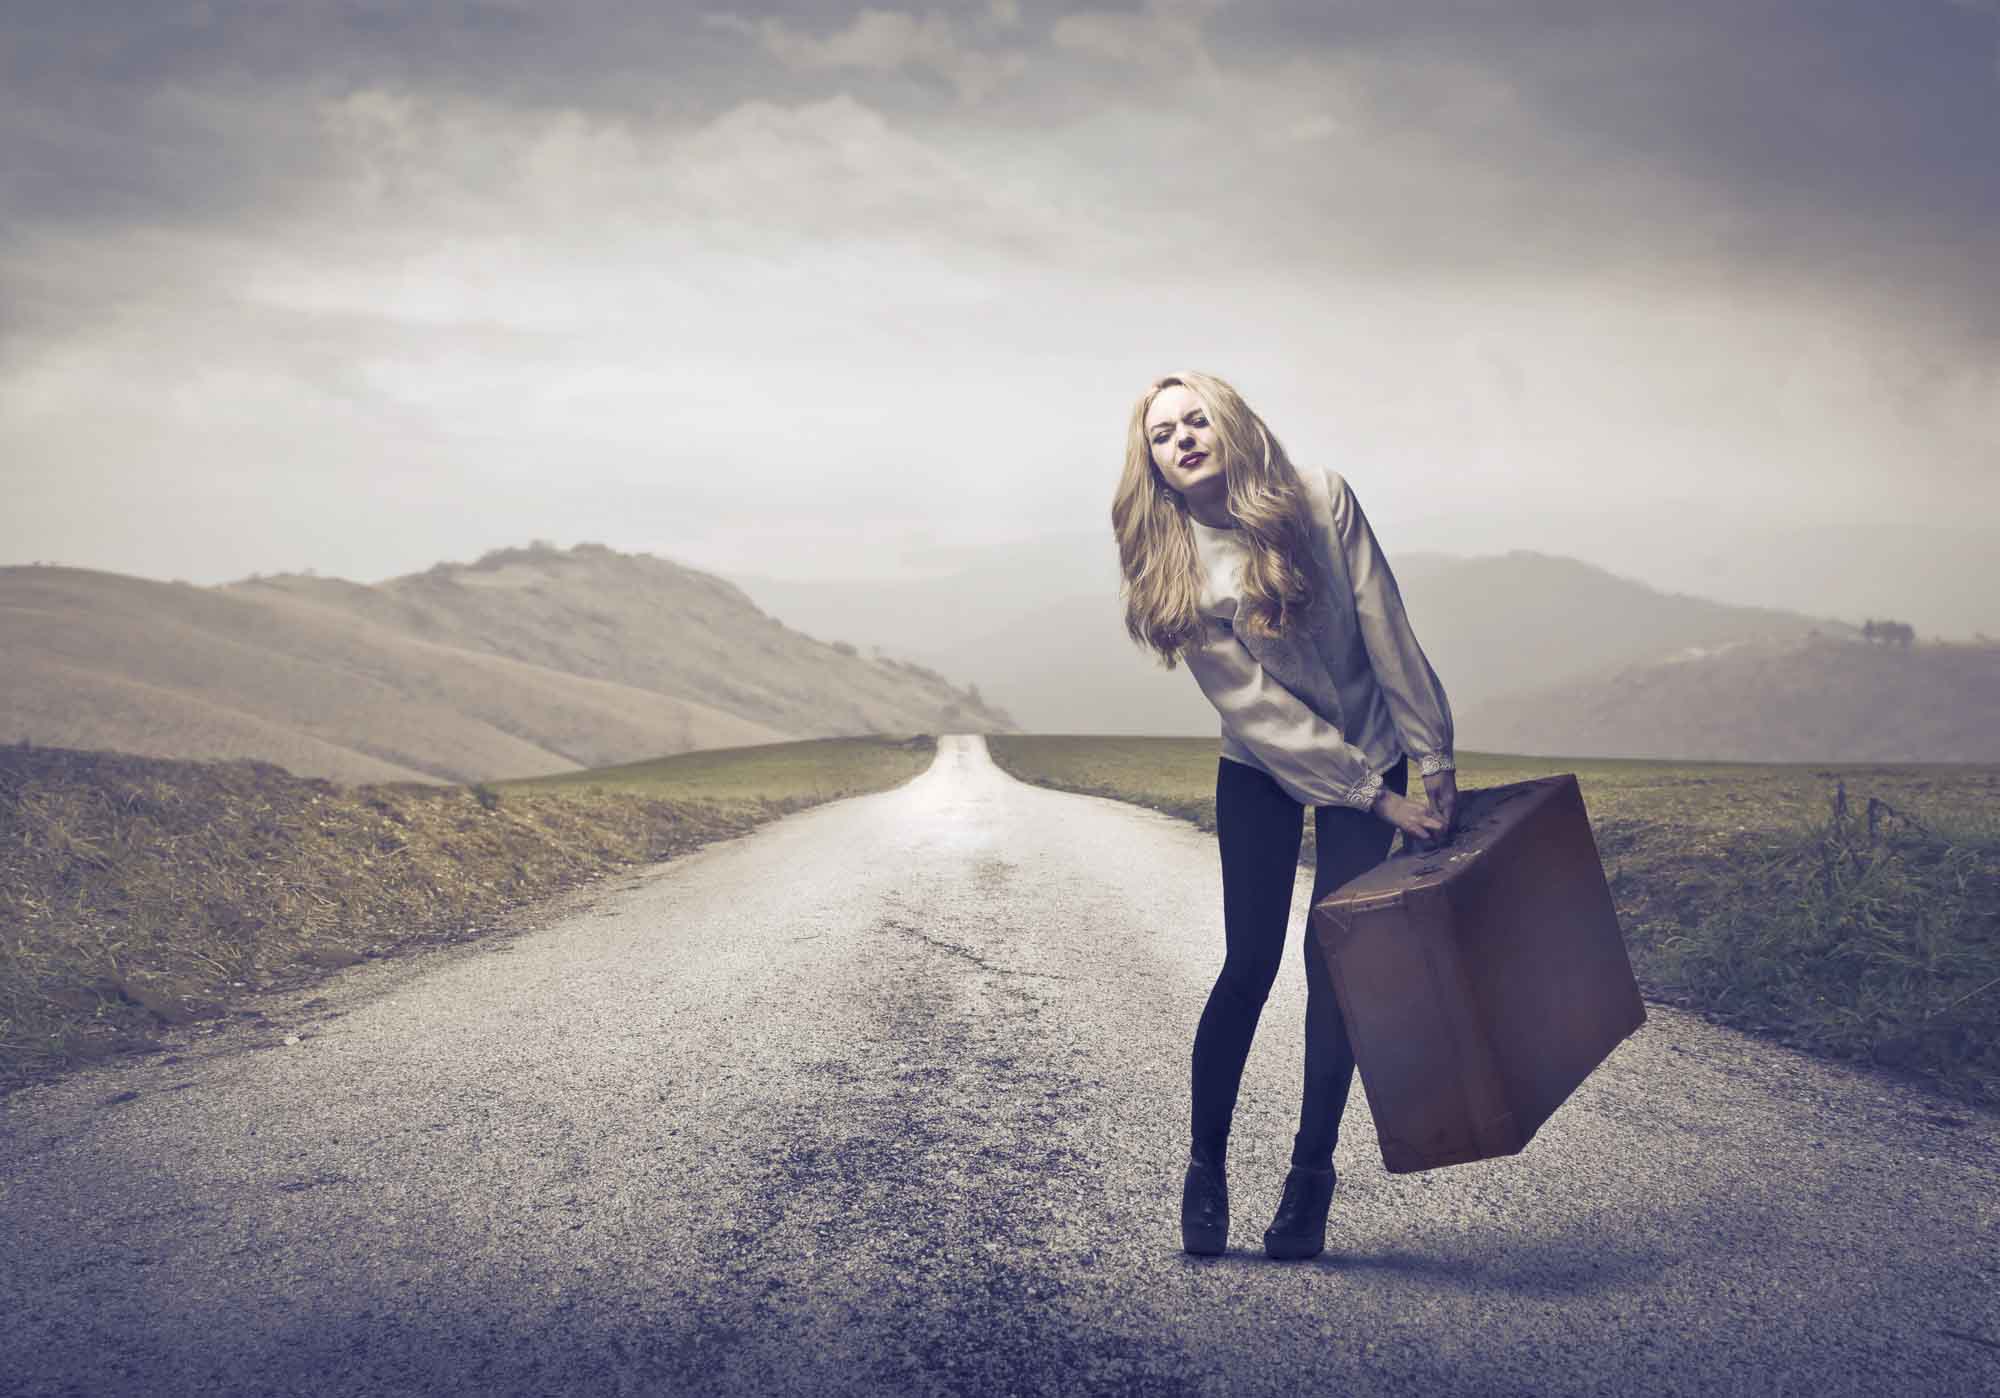 Is your unresolved emotional baggage holding you back from the love you want?